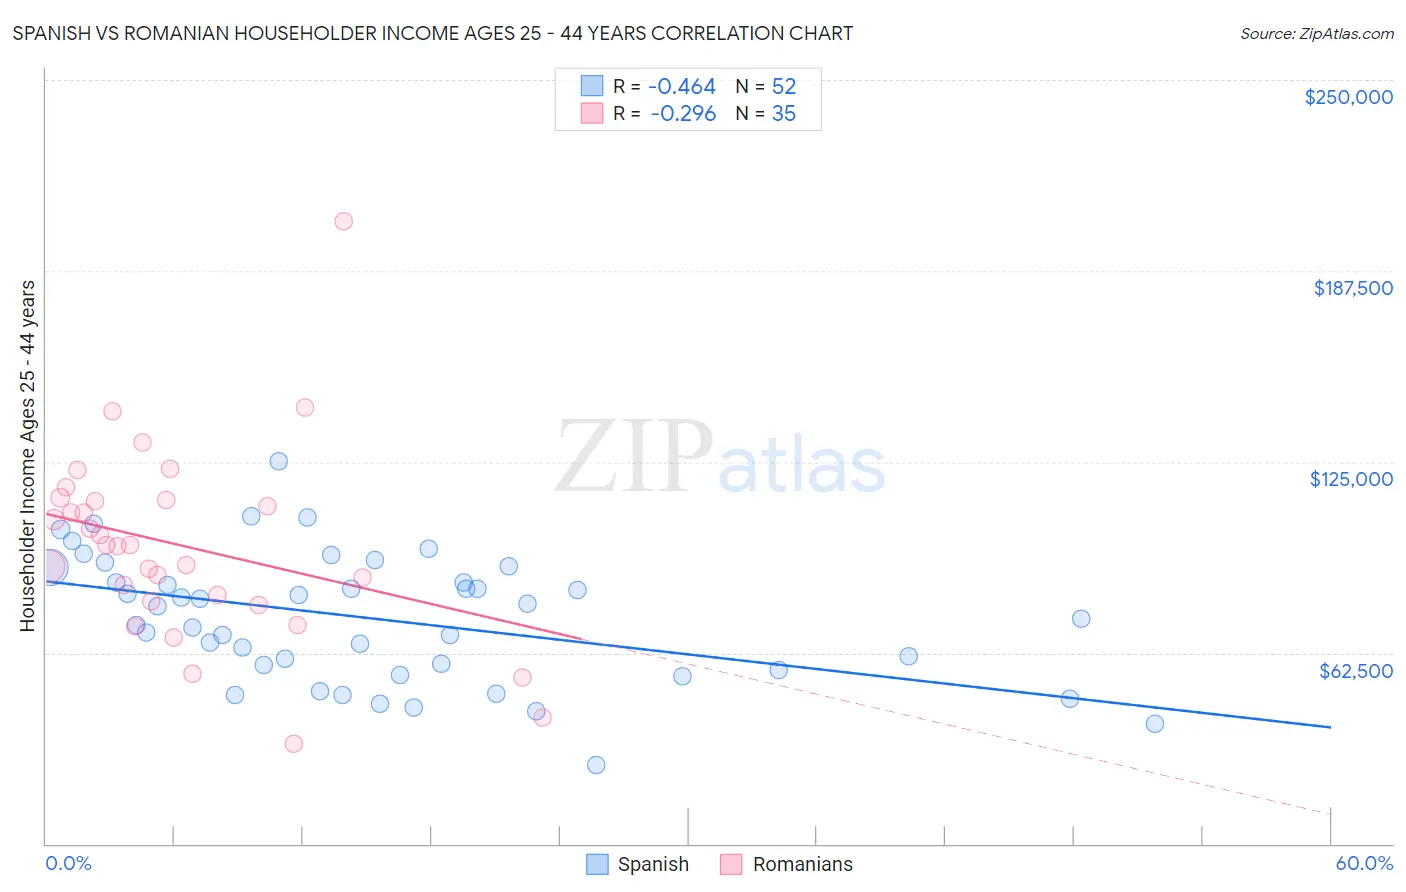 Spanish vs Romanian Householder Income Ages 25 - 44 years